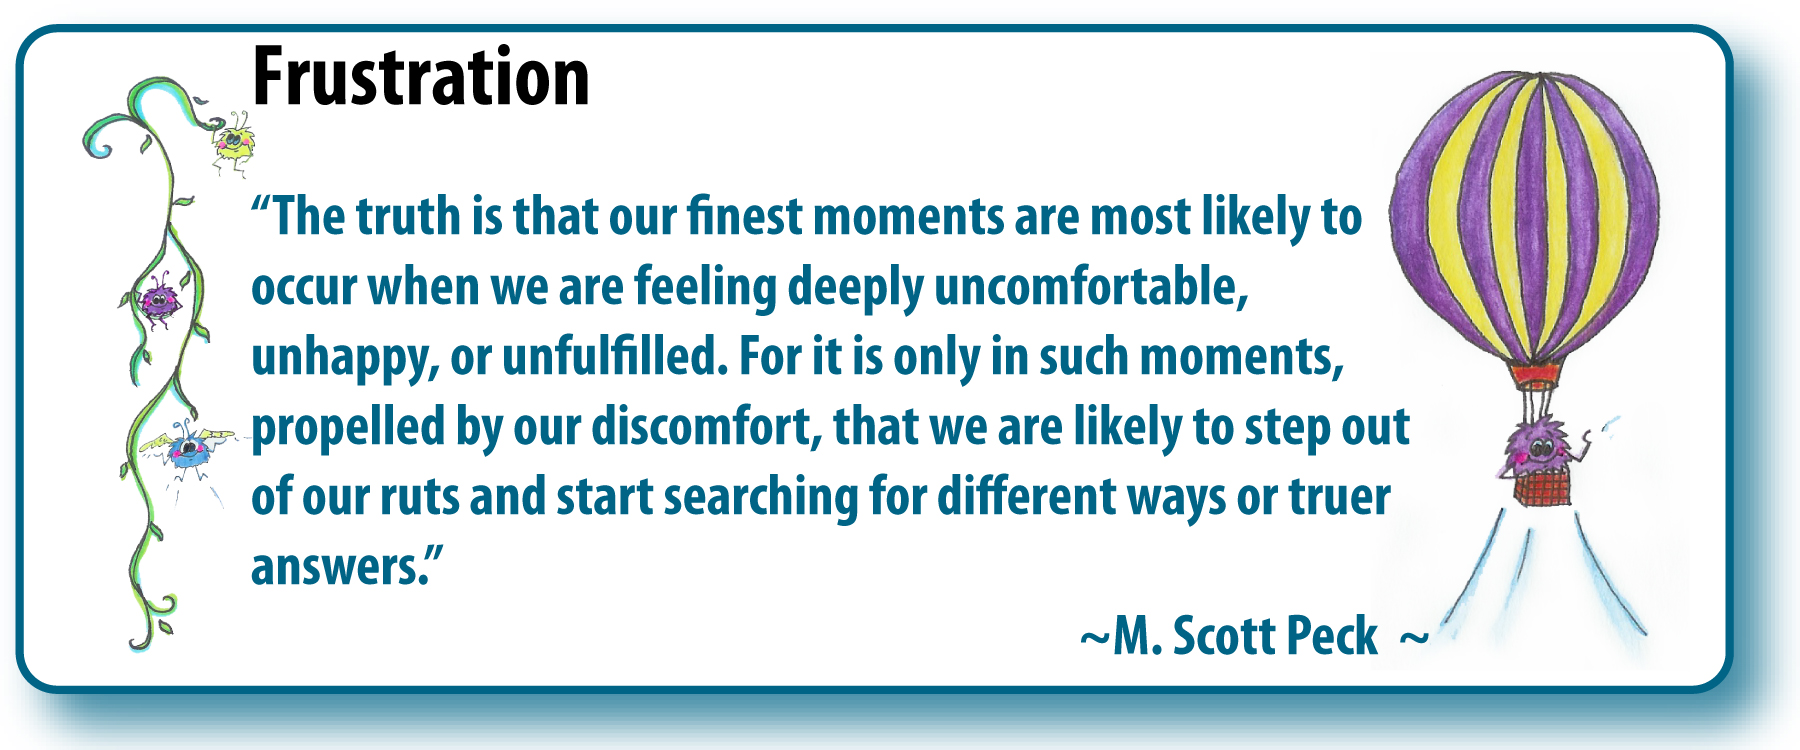 The truth is that our finest moments are most likely to occur when we are feeling